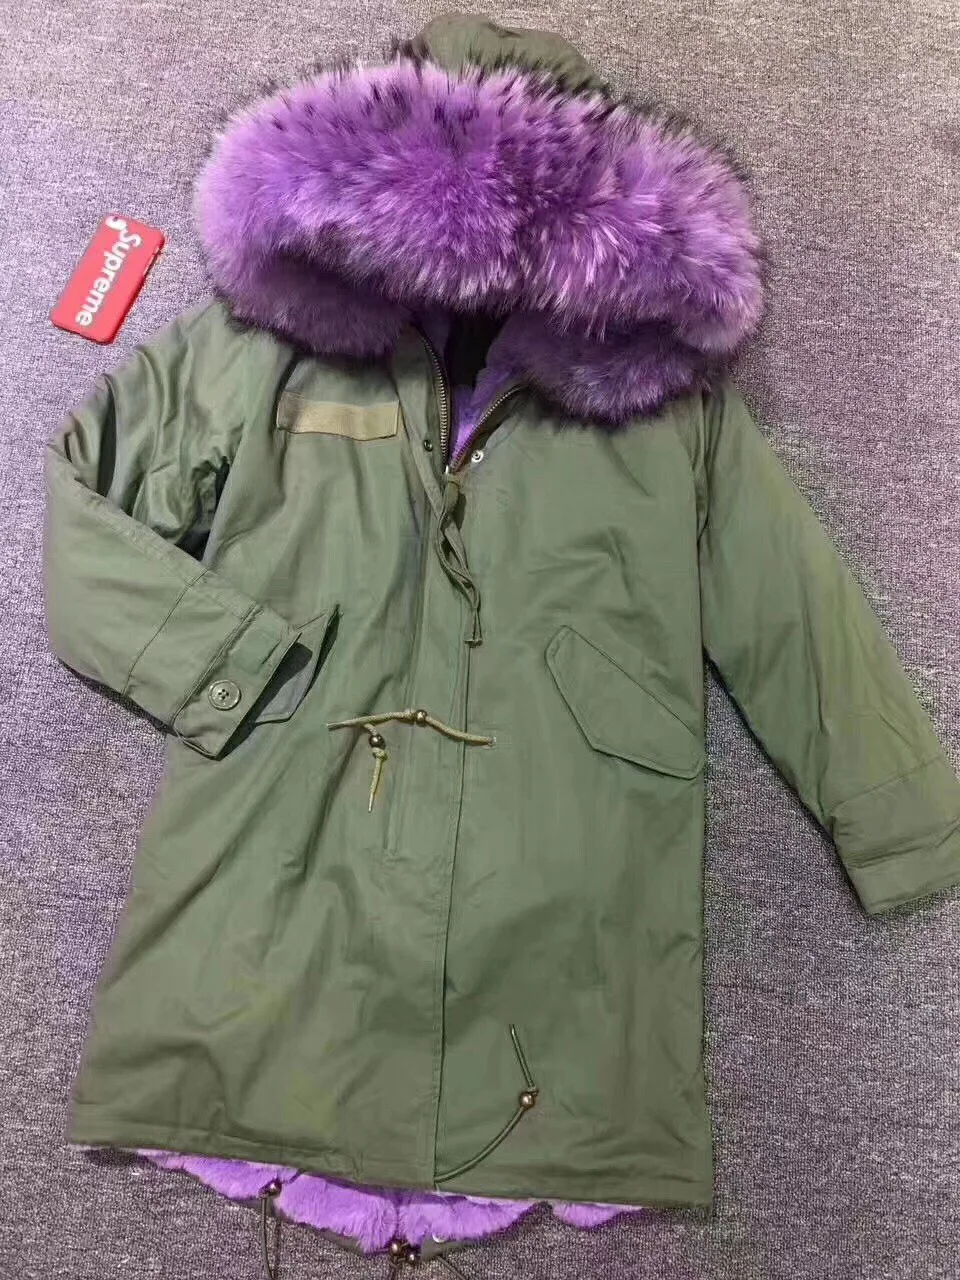 

Meifng Winter New Style Furs Coat Thickness Faux Fur Lined Lilac Color Winter Long Army Green Coat